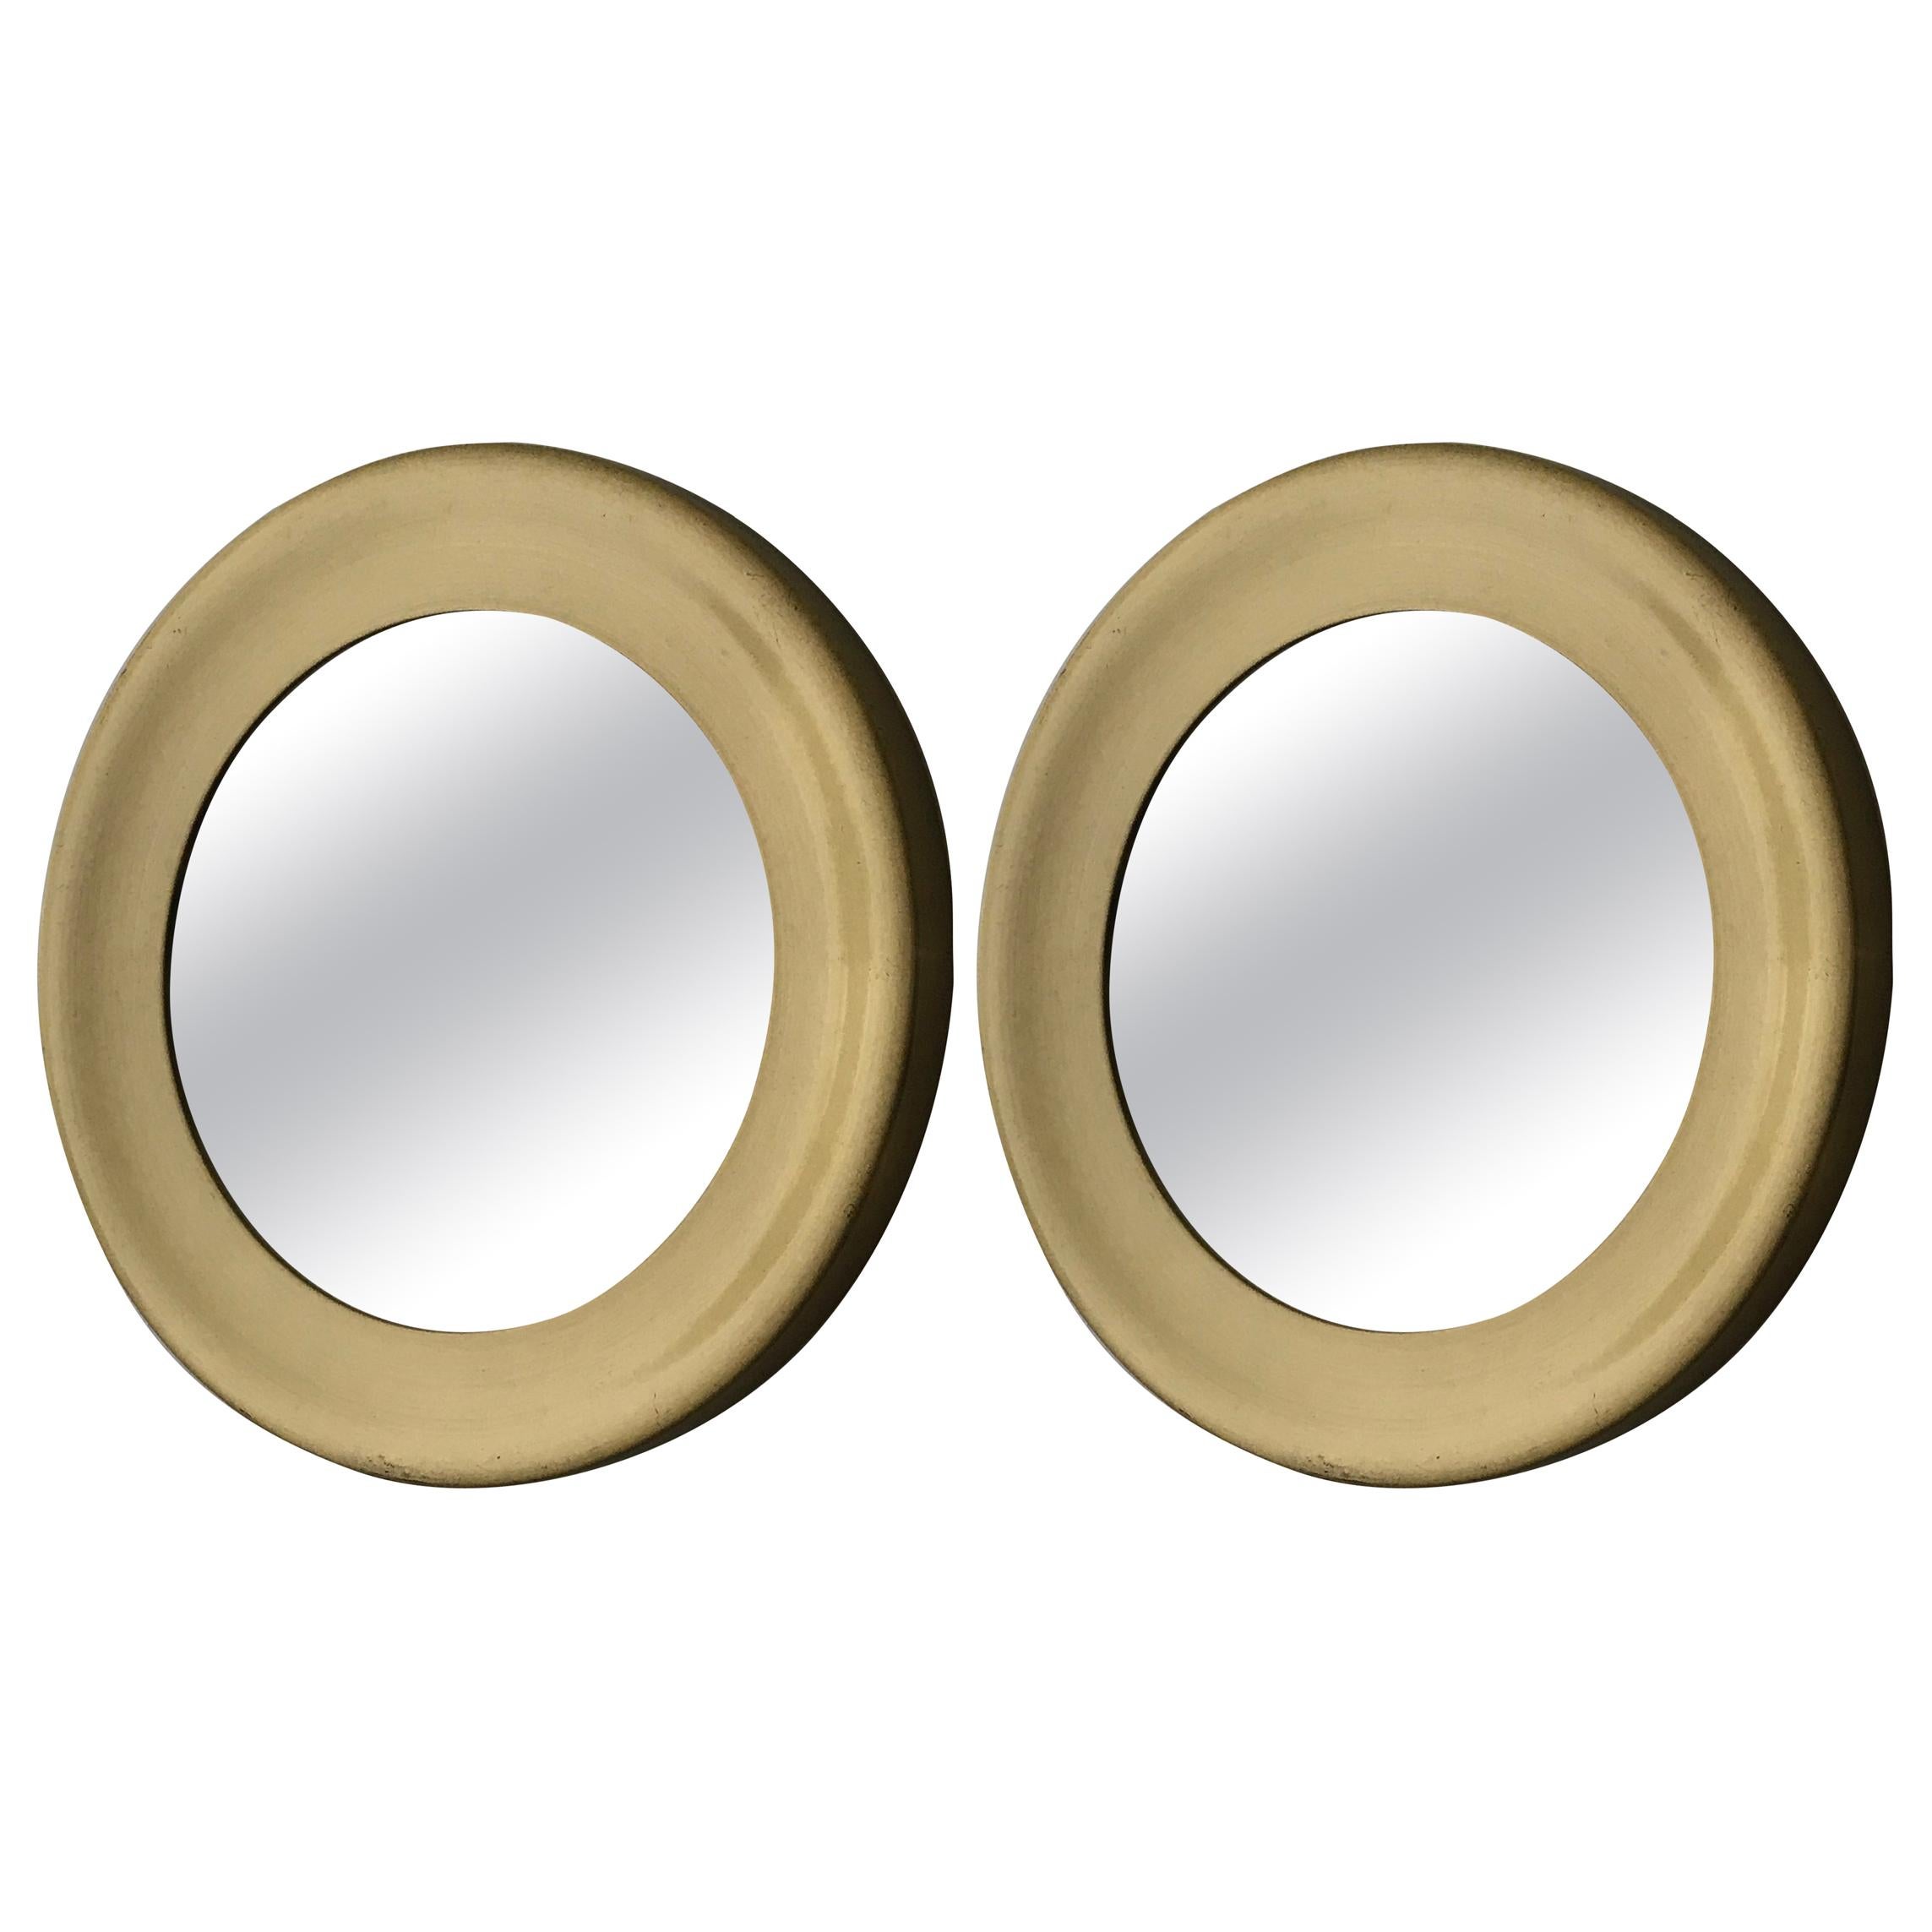 Pair of Round Brass Mirrors by Glasmaster, Markaryd, Sweden, 1960s For Sale